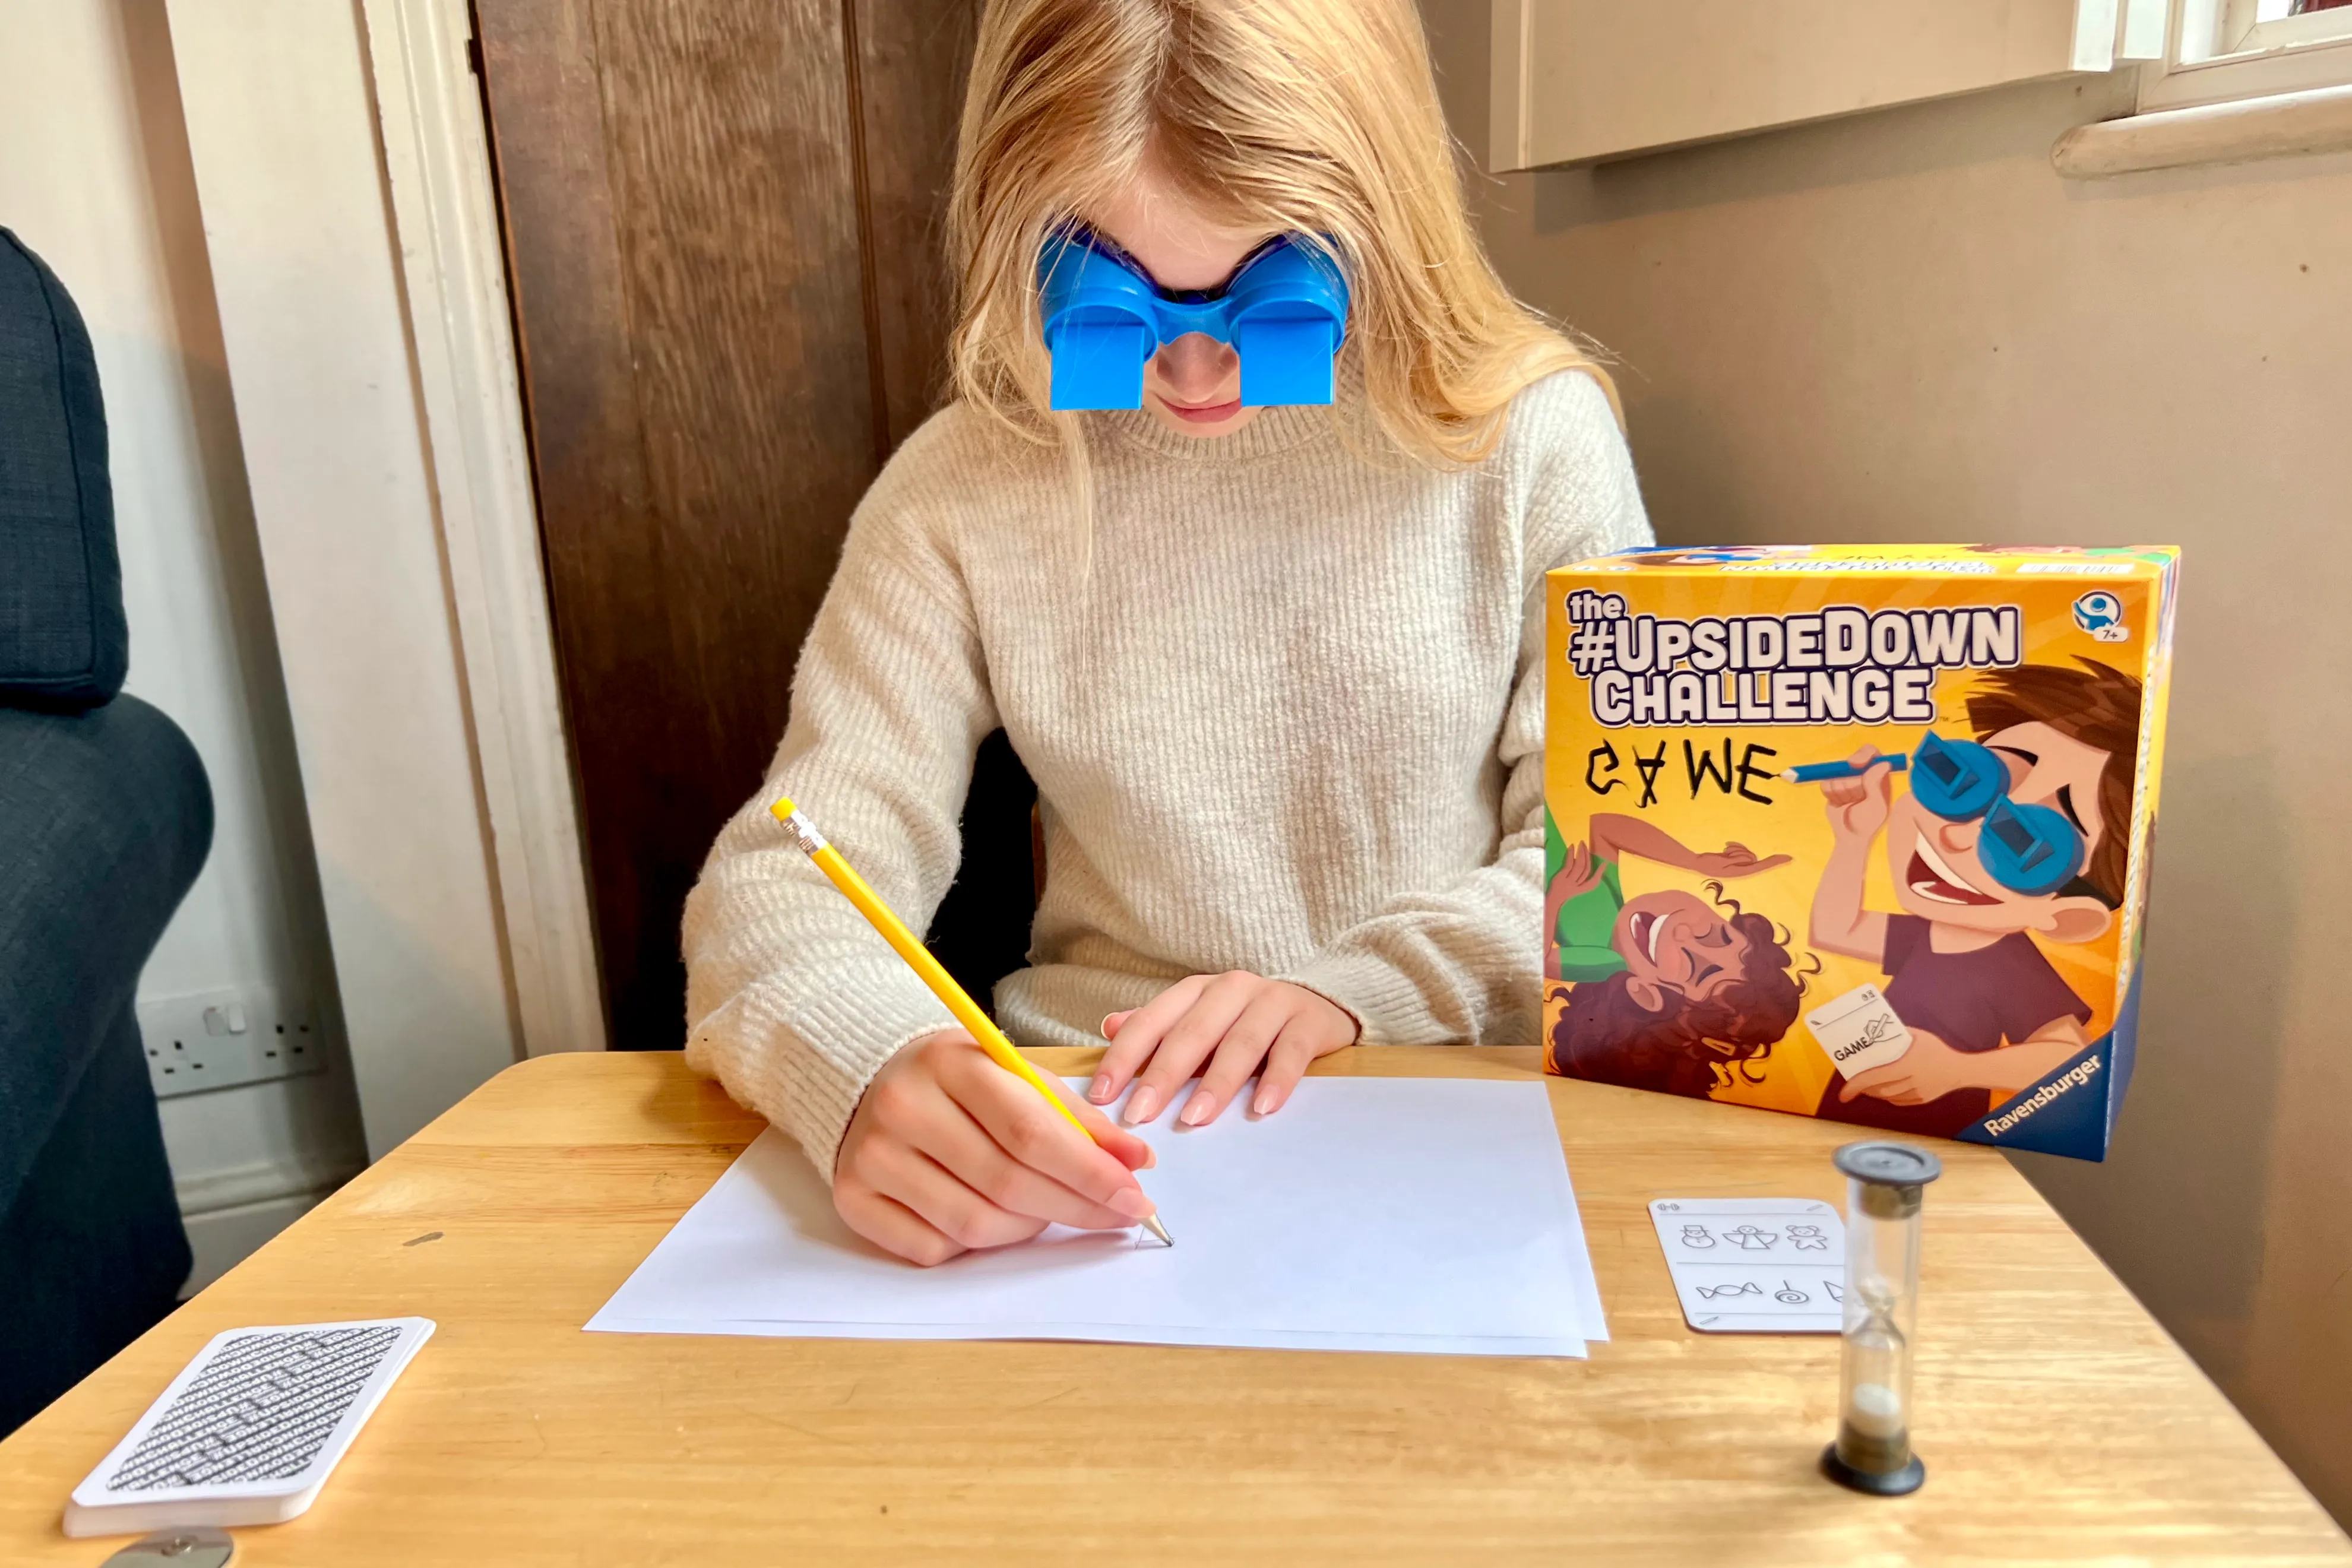 A girl with long hair wearing blue googles and drawing as part of the The #UpsideDown Challenge Game received to review